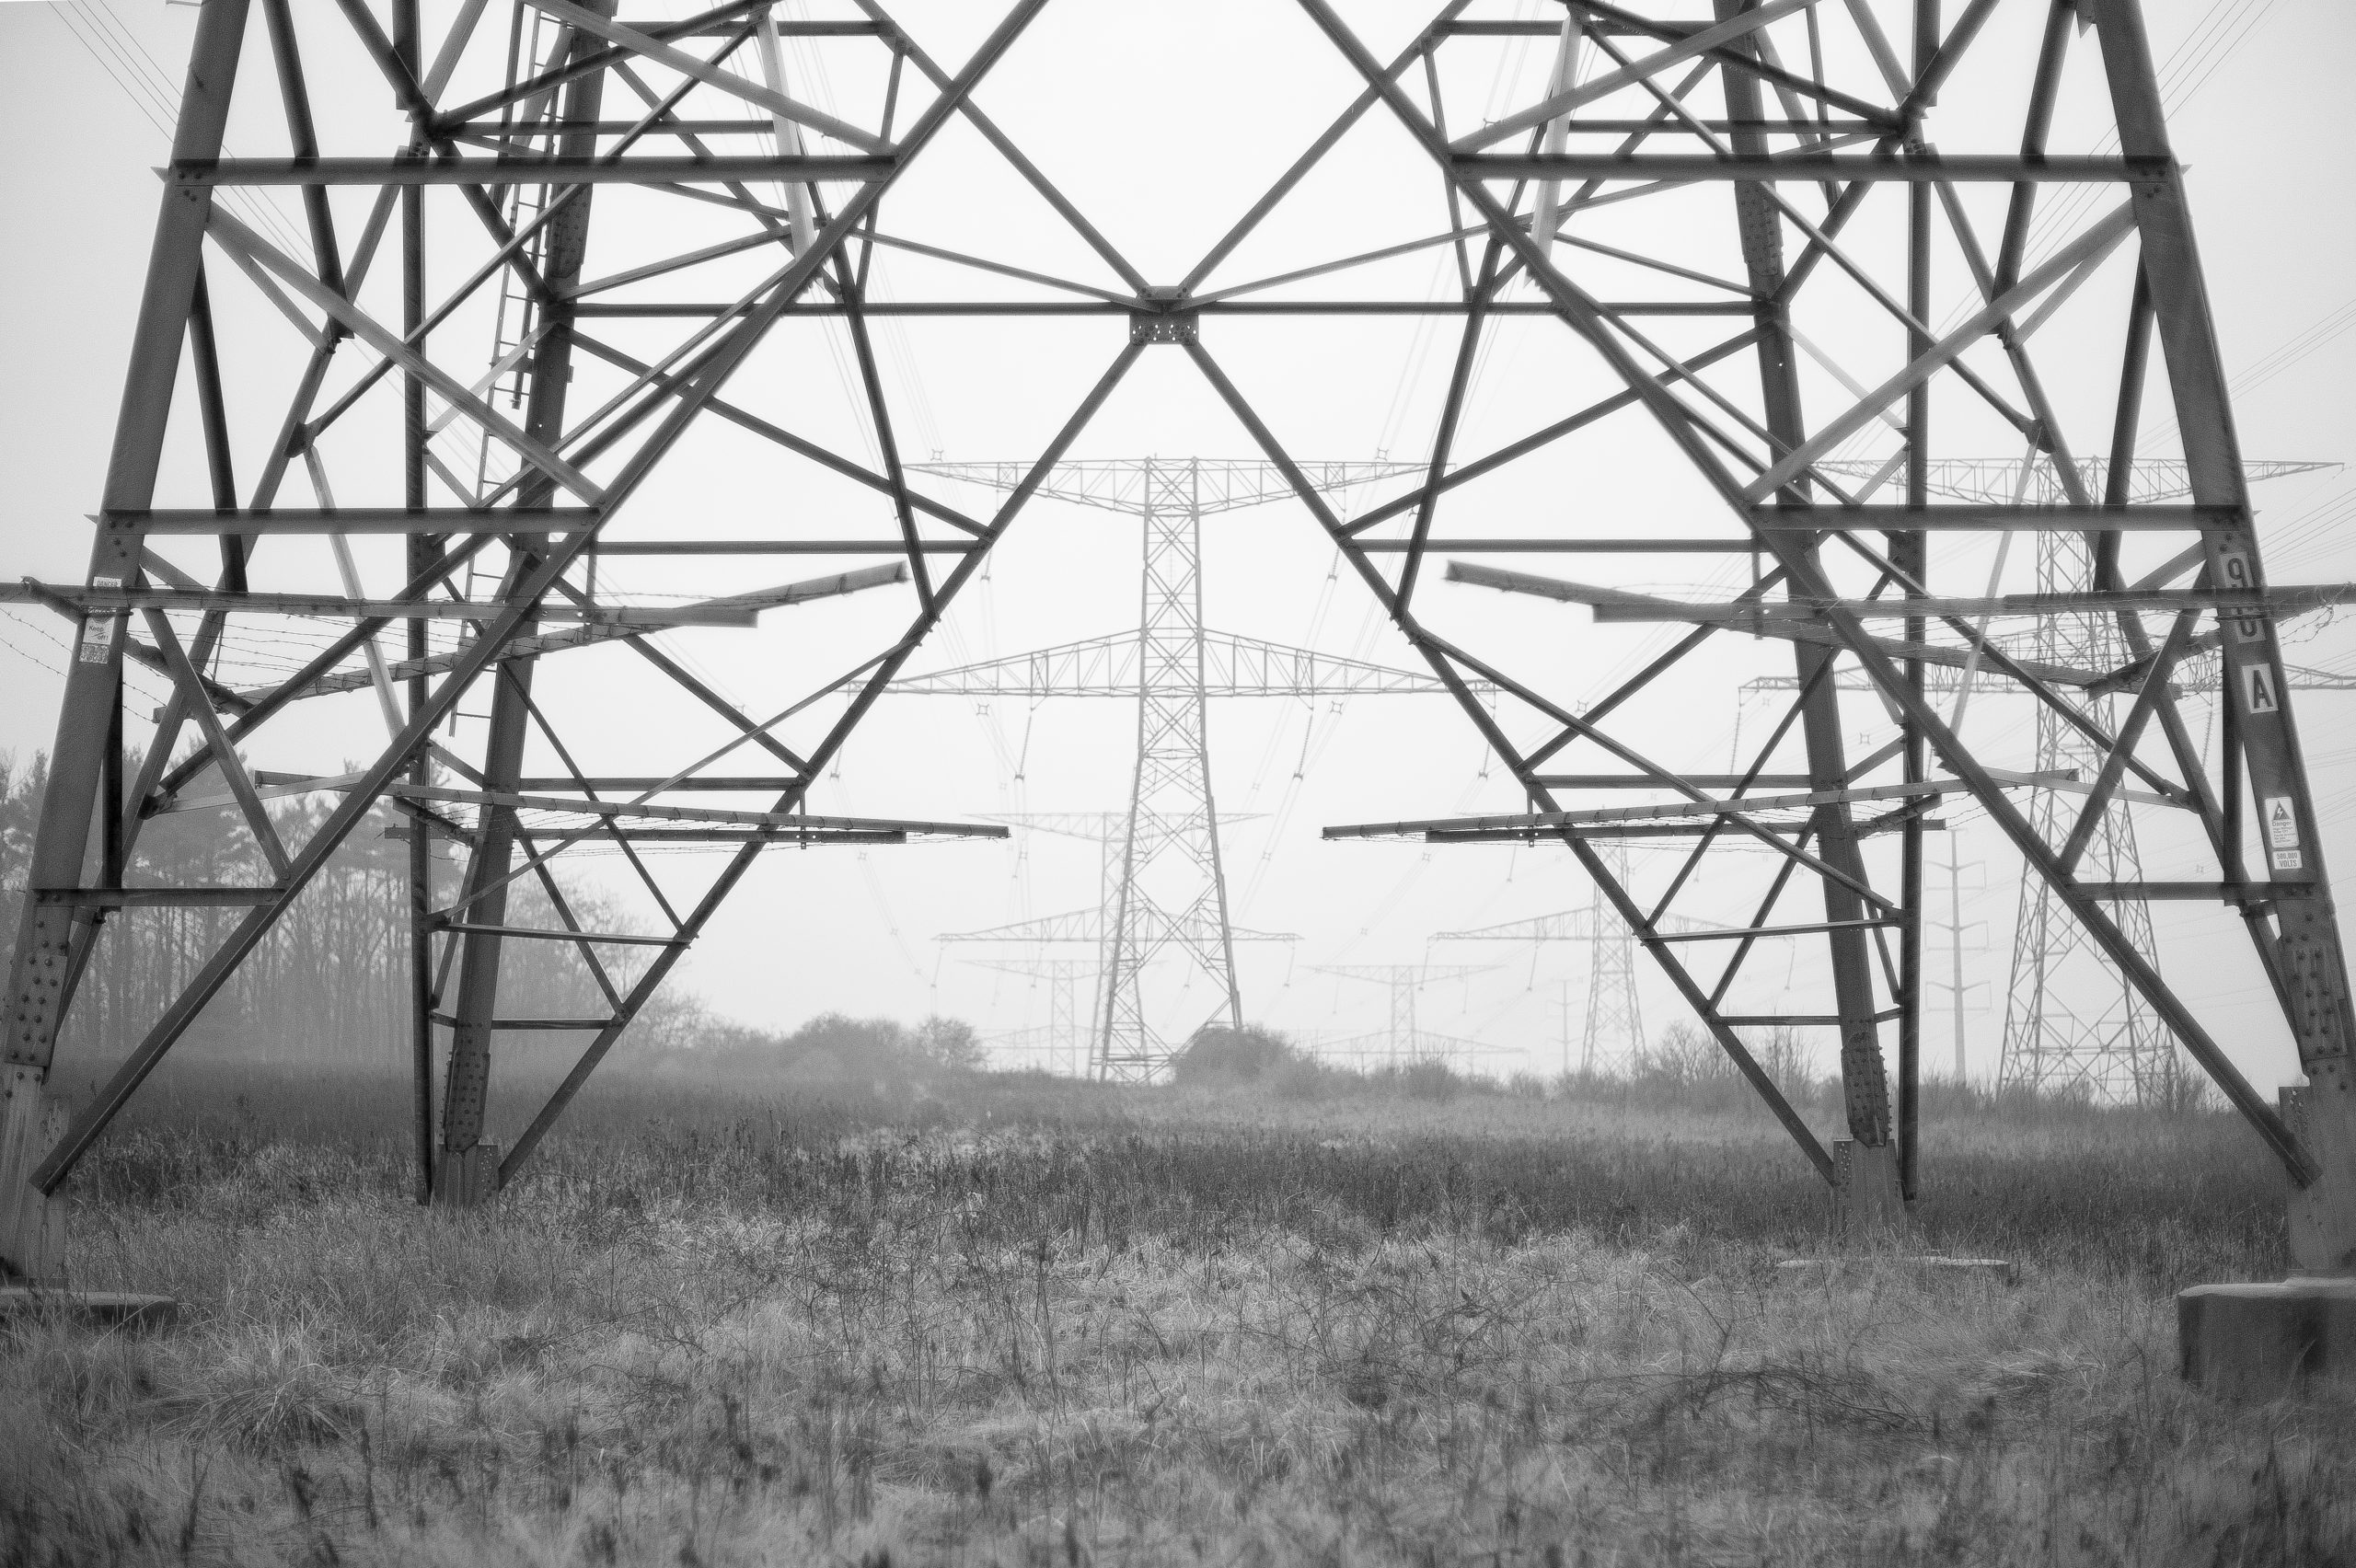 1-899738882, @VAu 1-131-978 (2013 Jan-Feb Unpub), Content, Event, Event - Workshop, Favourite-All Time, OCAD, OCAD-Assignment #1, OCAD-Assignment #2, Power Line, Technology, Thing, Tower, Transmission Towers, VAU001131978, suspention